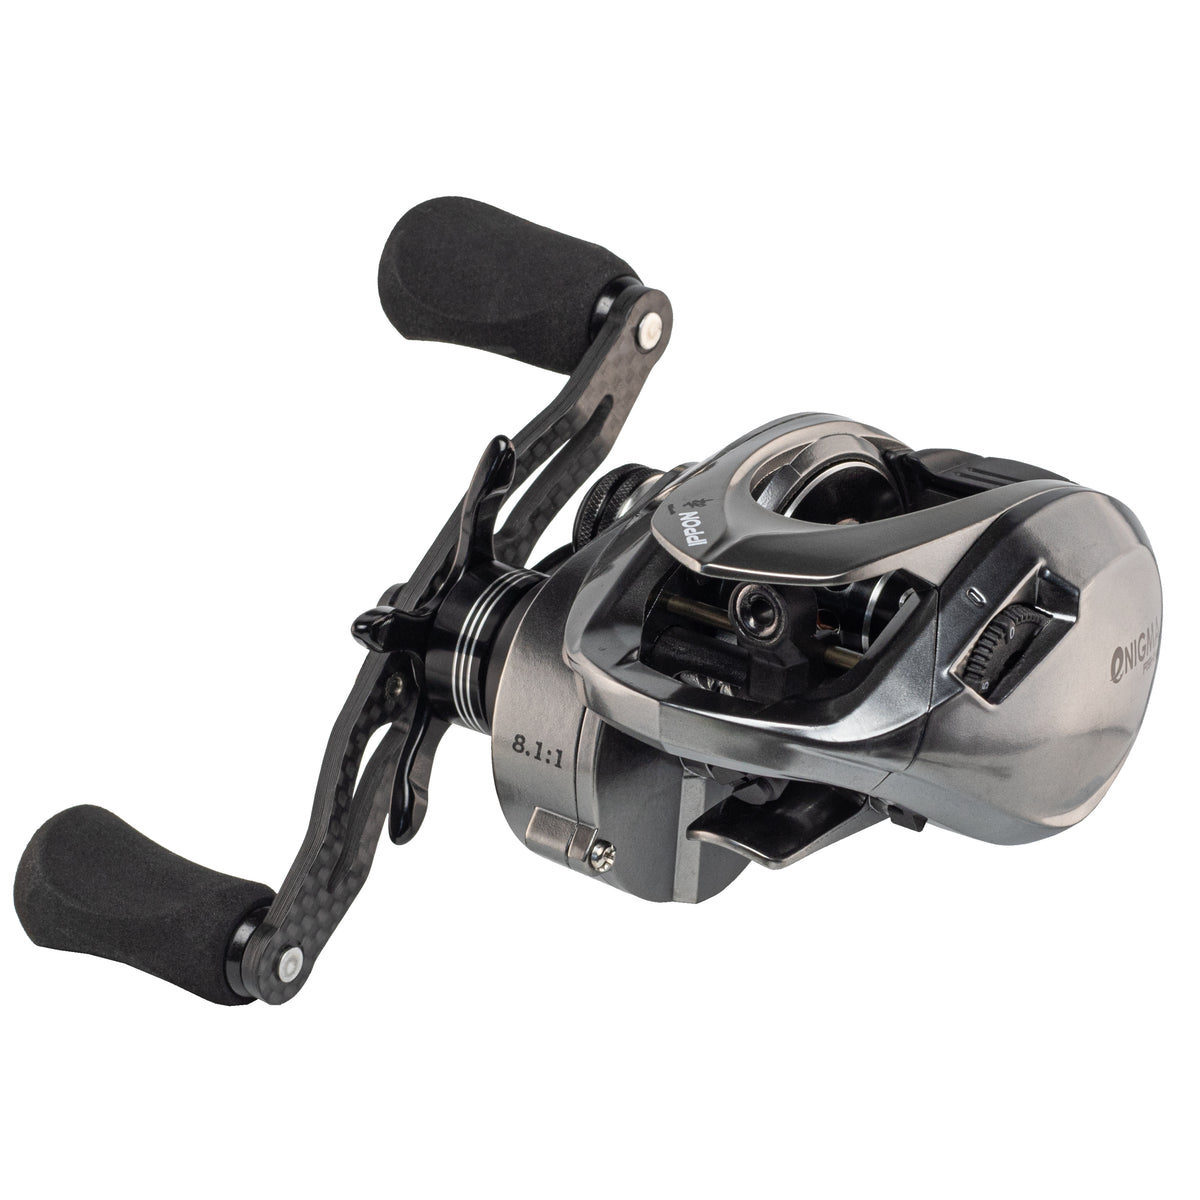 Pesca Baitcasting Reel Save Up To, 54% OFF